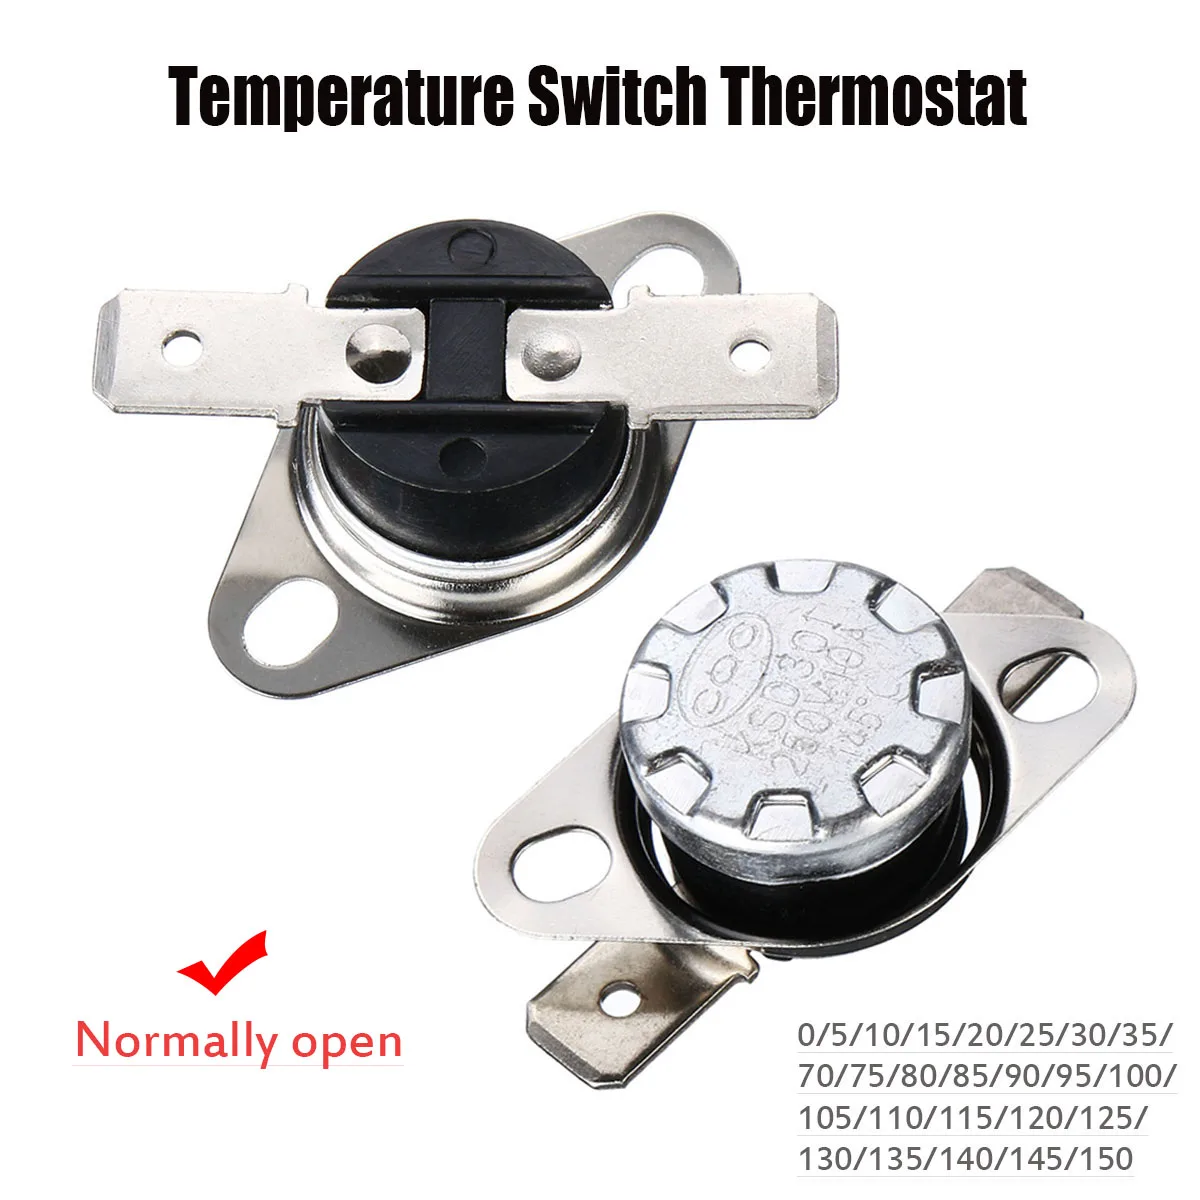 KSD301 250V 10A 140°C DEGREE TEMPERATURE SWITCH THERMOSTAT NORMALLY OPEN DR30 